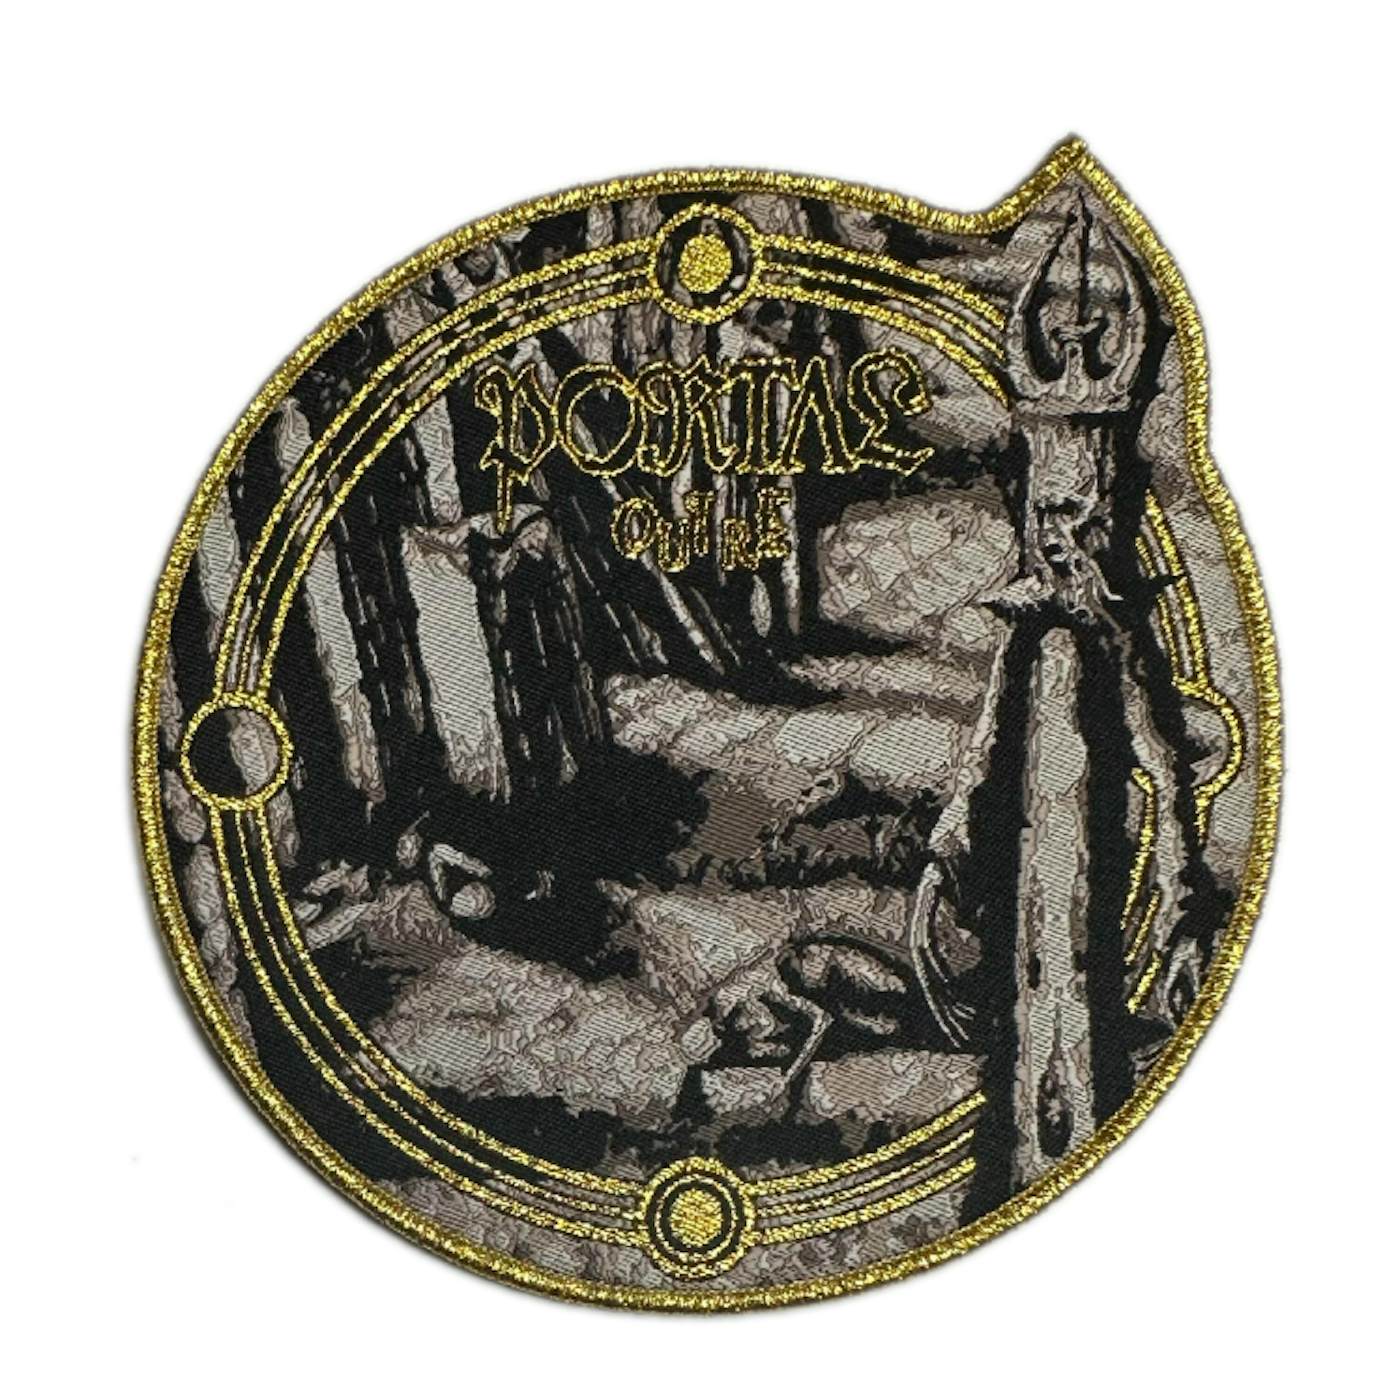 PORTAL - 'Outre' Round Gold Patch